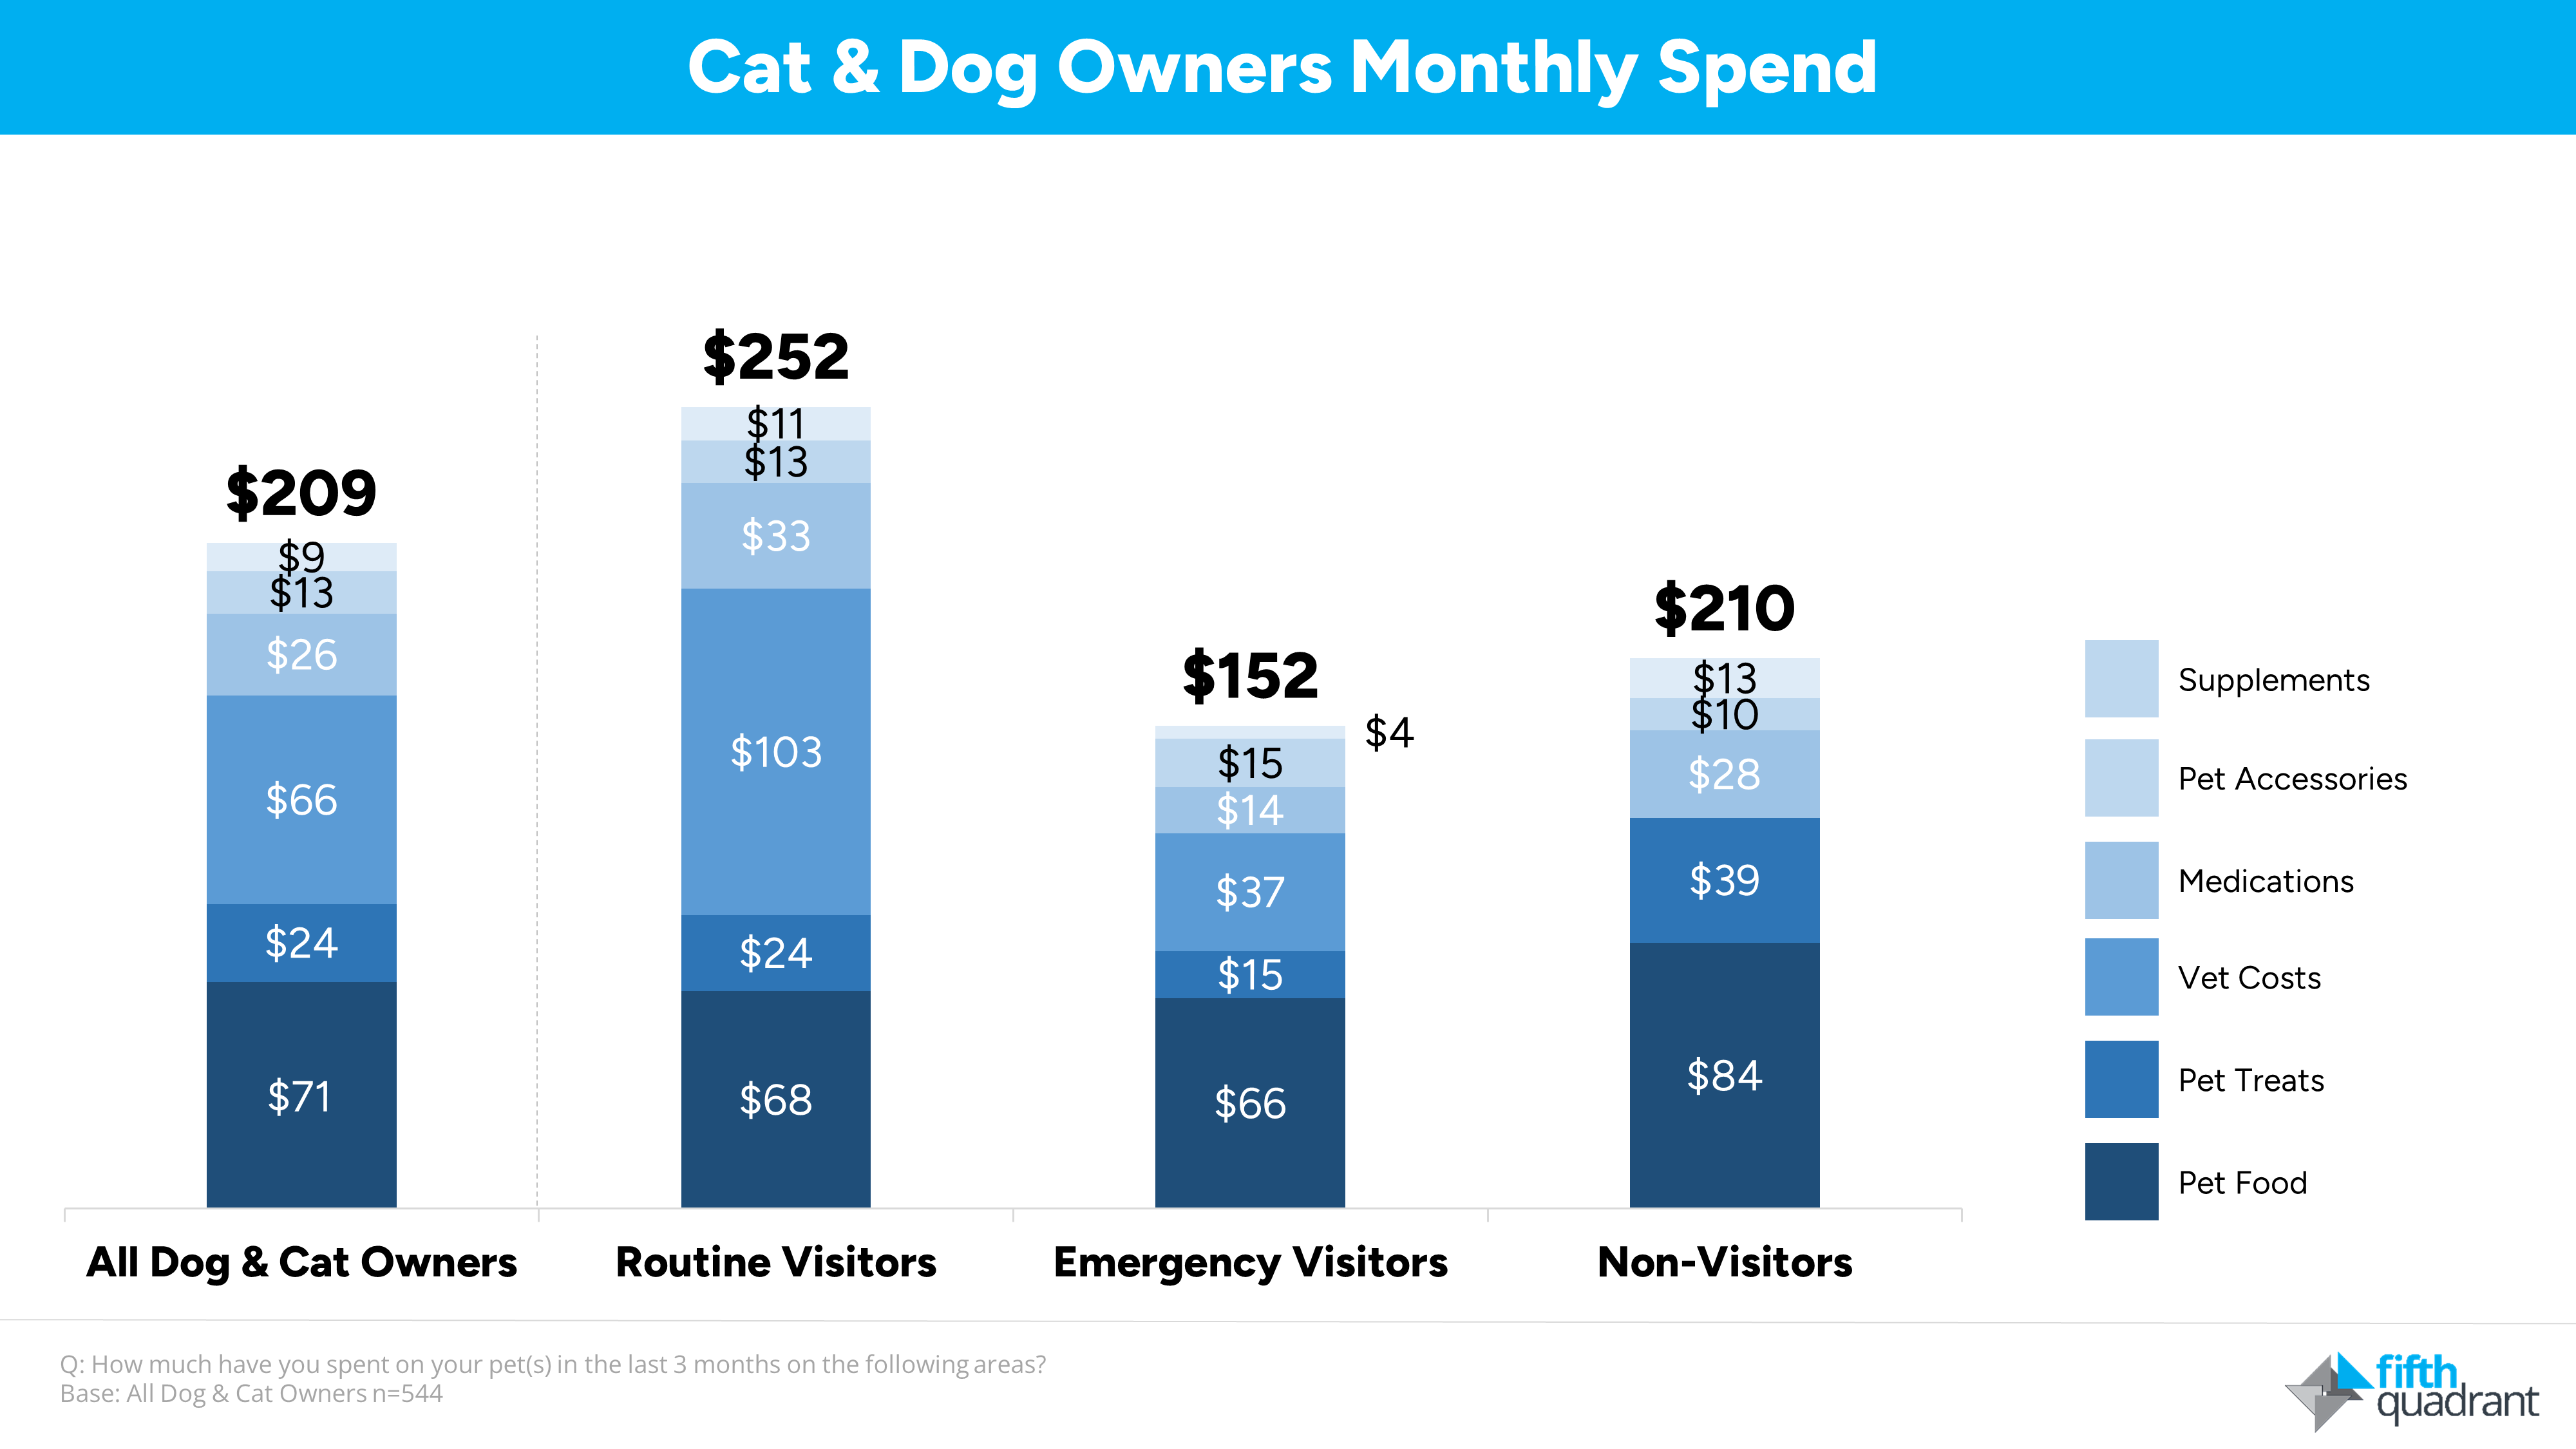 paws for thought: decoding Australian's pet health spending - Montly Pet Spend of Austrlian Dog and Cat Owners